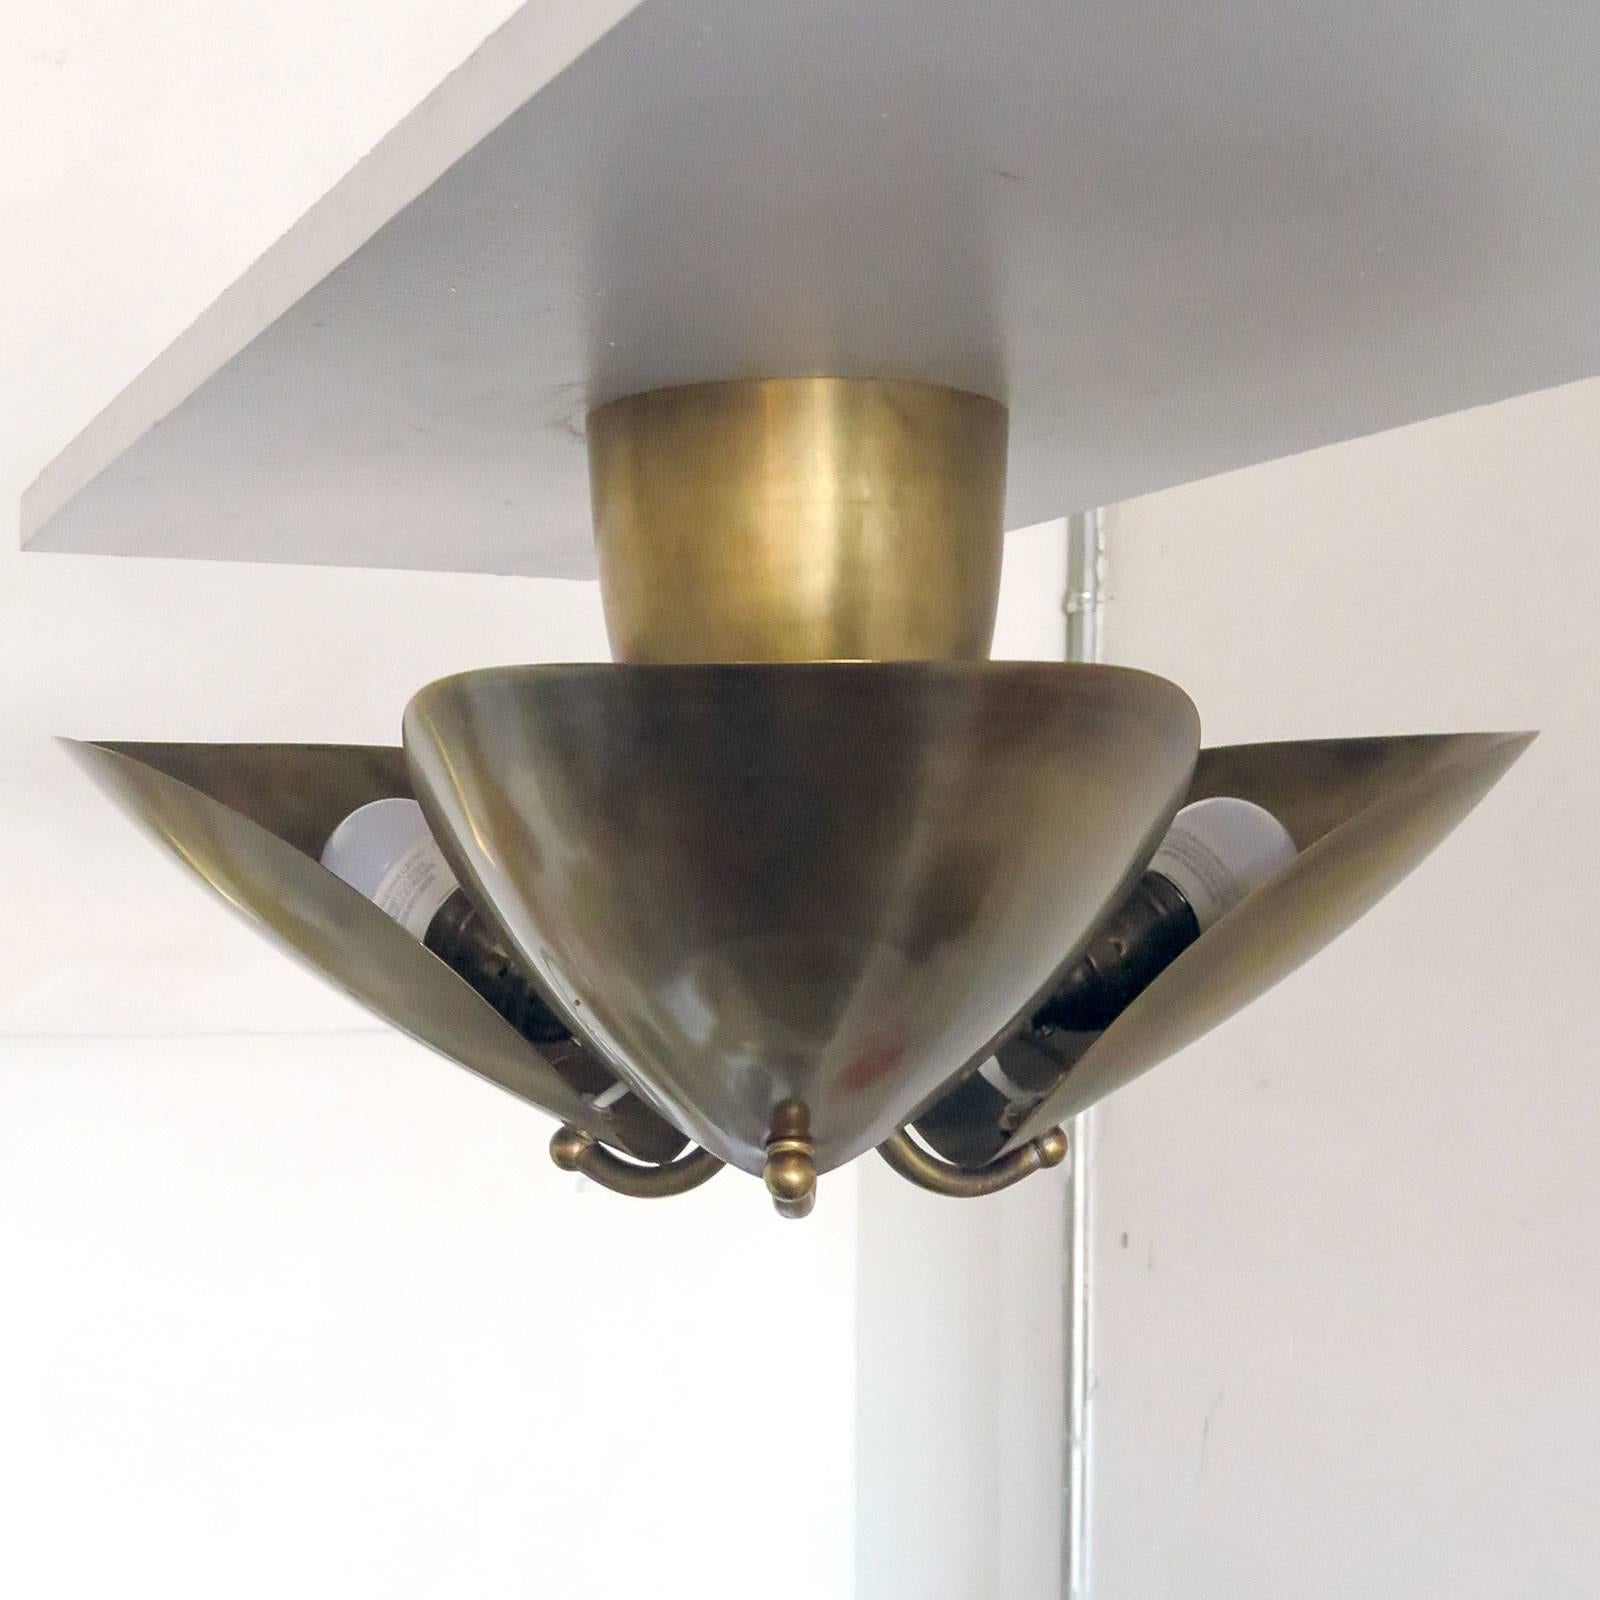 Wonderful, organic three-petal aged brass flush mount by Gallery L7, handcrafted and finished in Los Angeles from American brass. Three E26 sockets per fixture, max. wattage 60w each, wired for US standards or European standards (110v/220v), bulbs